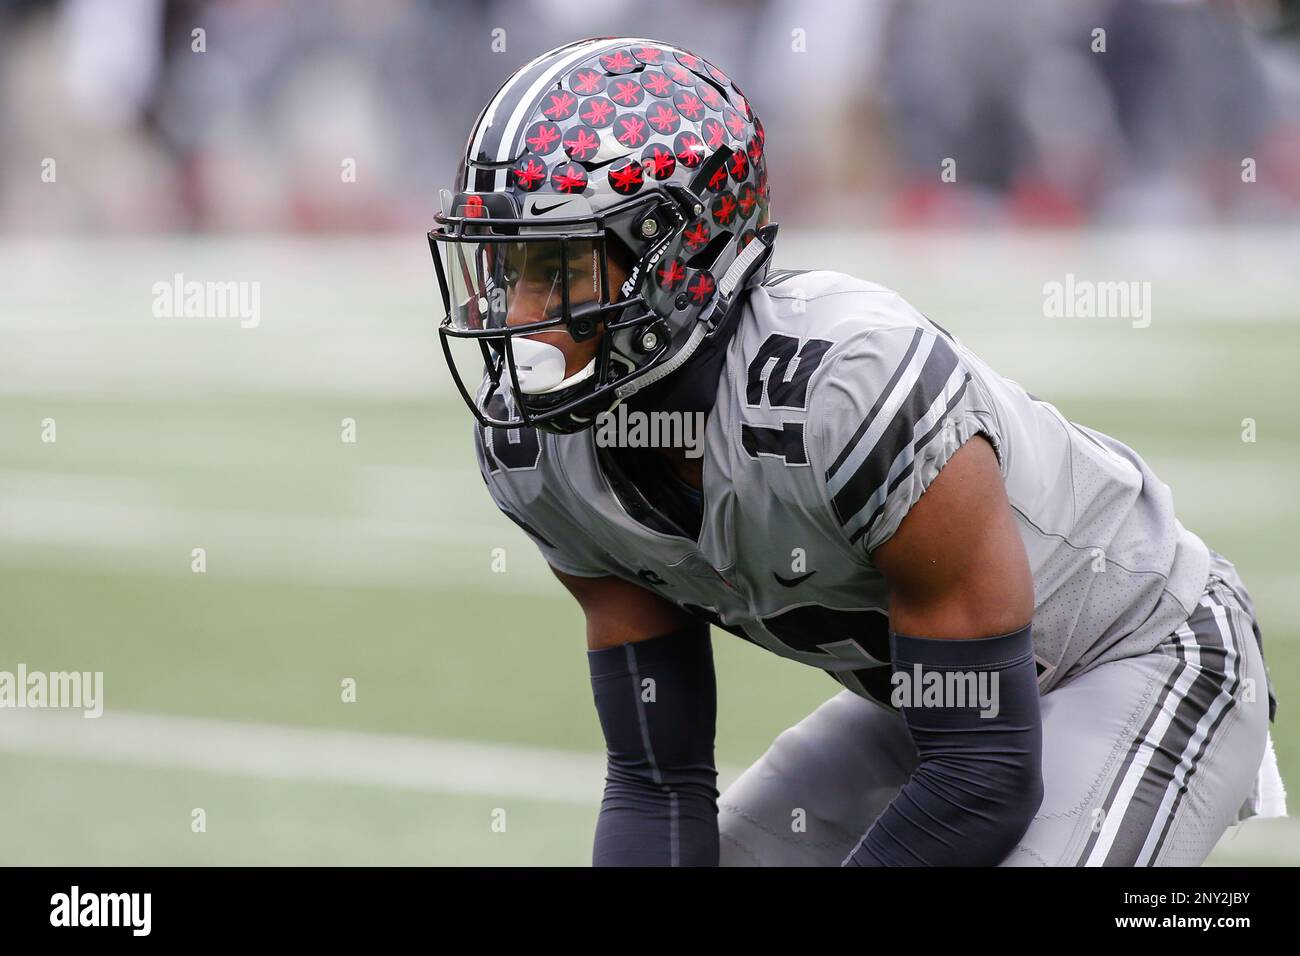 Denzel Ward has all the tools to be Ohio State's next No. 1 corner